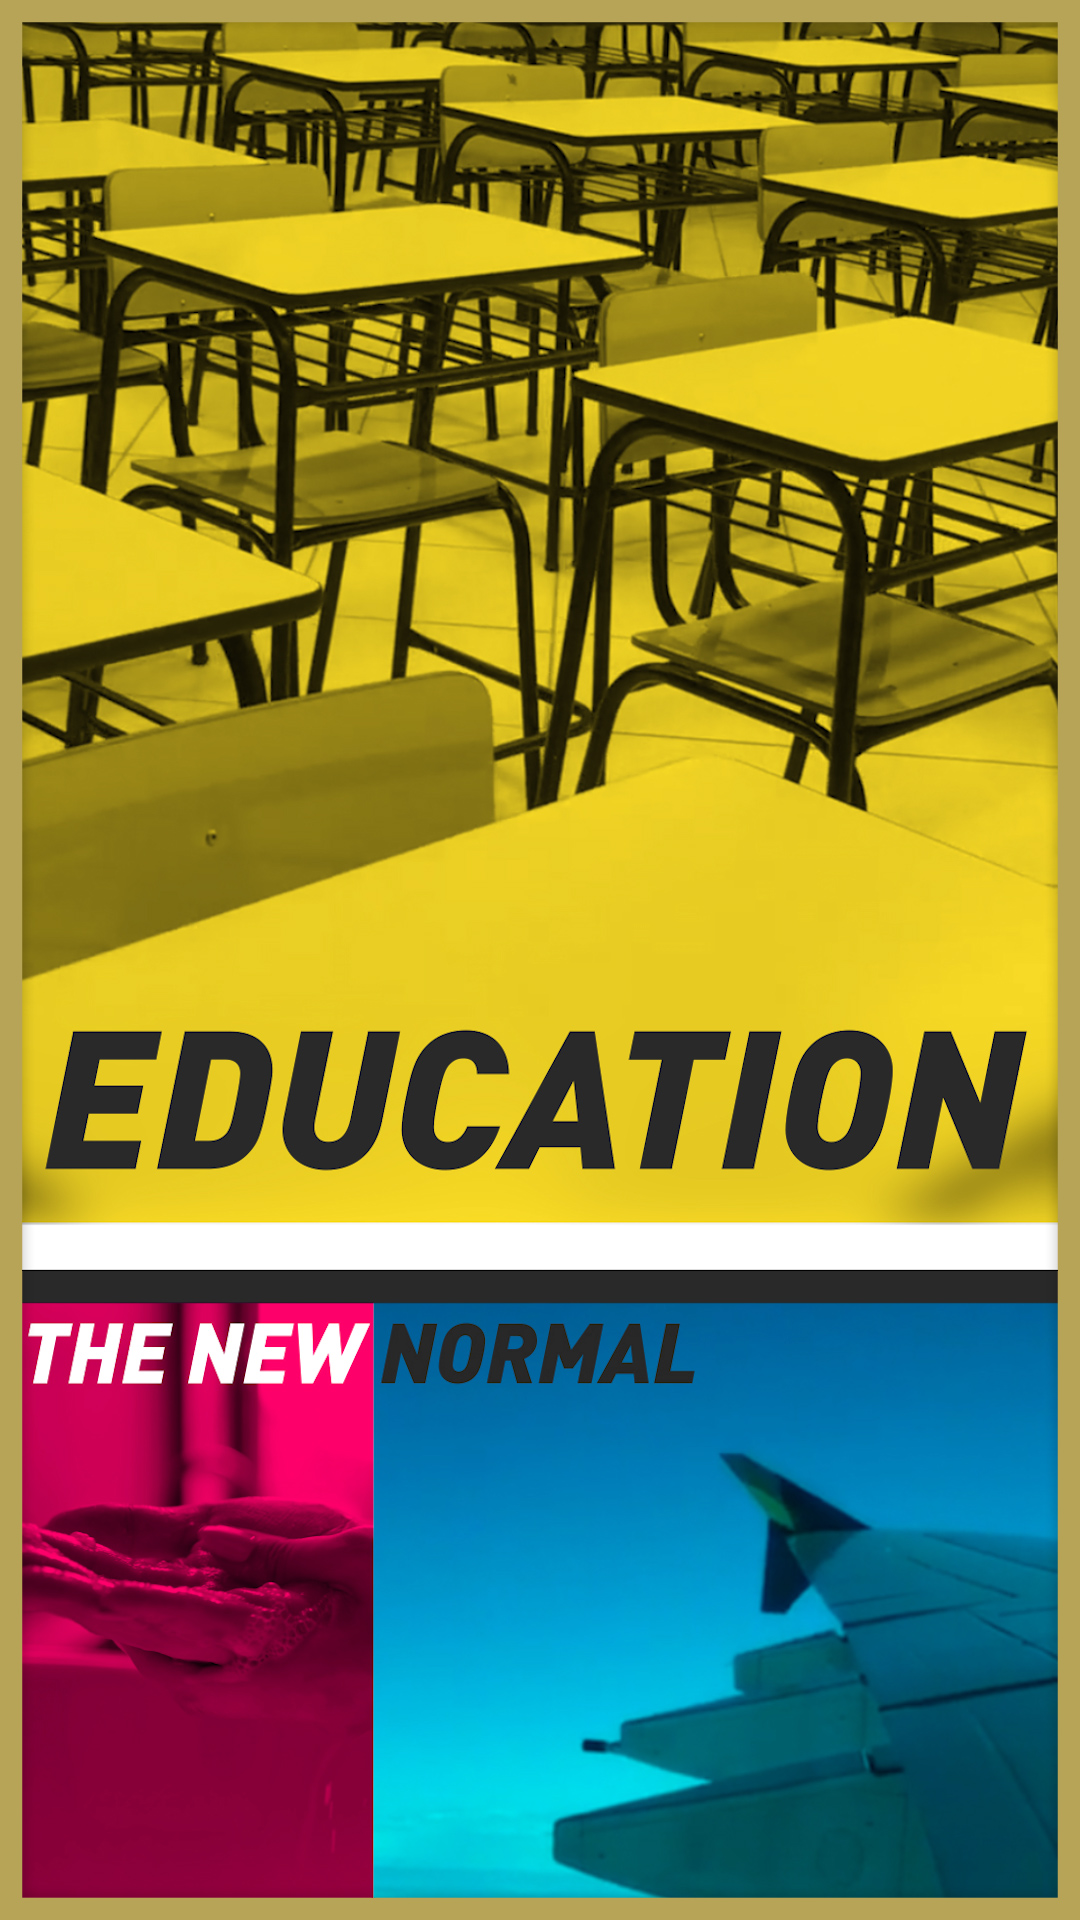 editorial writing about new normal education